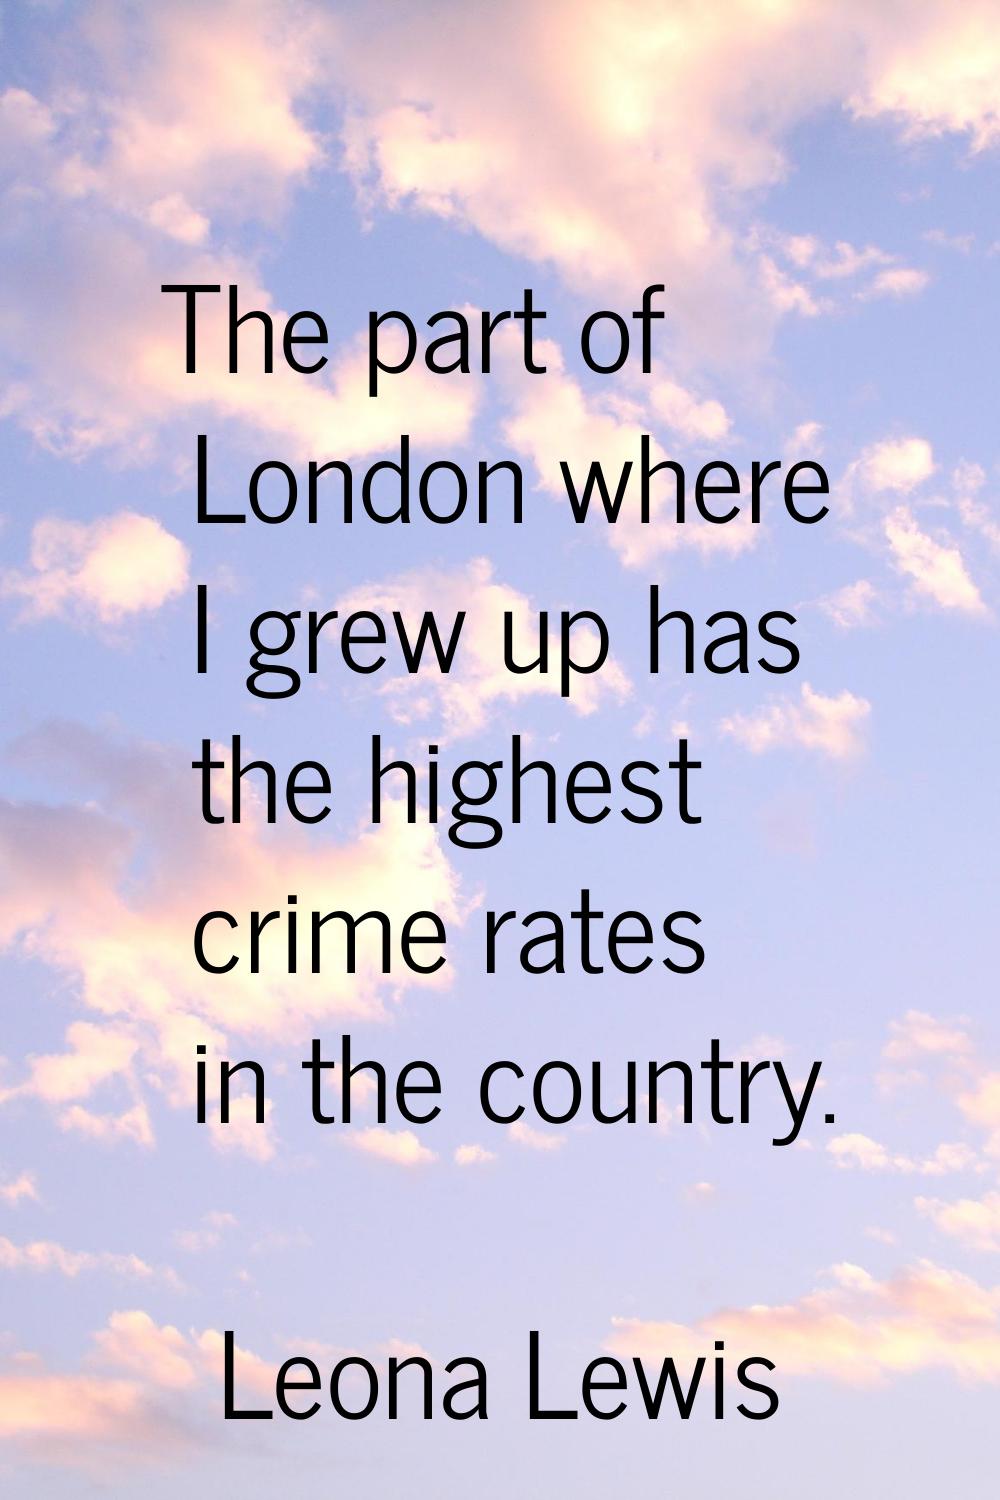 The part of London where I grew up has the highest crime rates in the country.